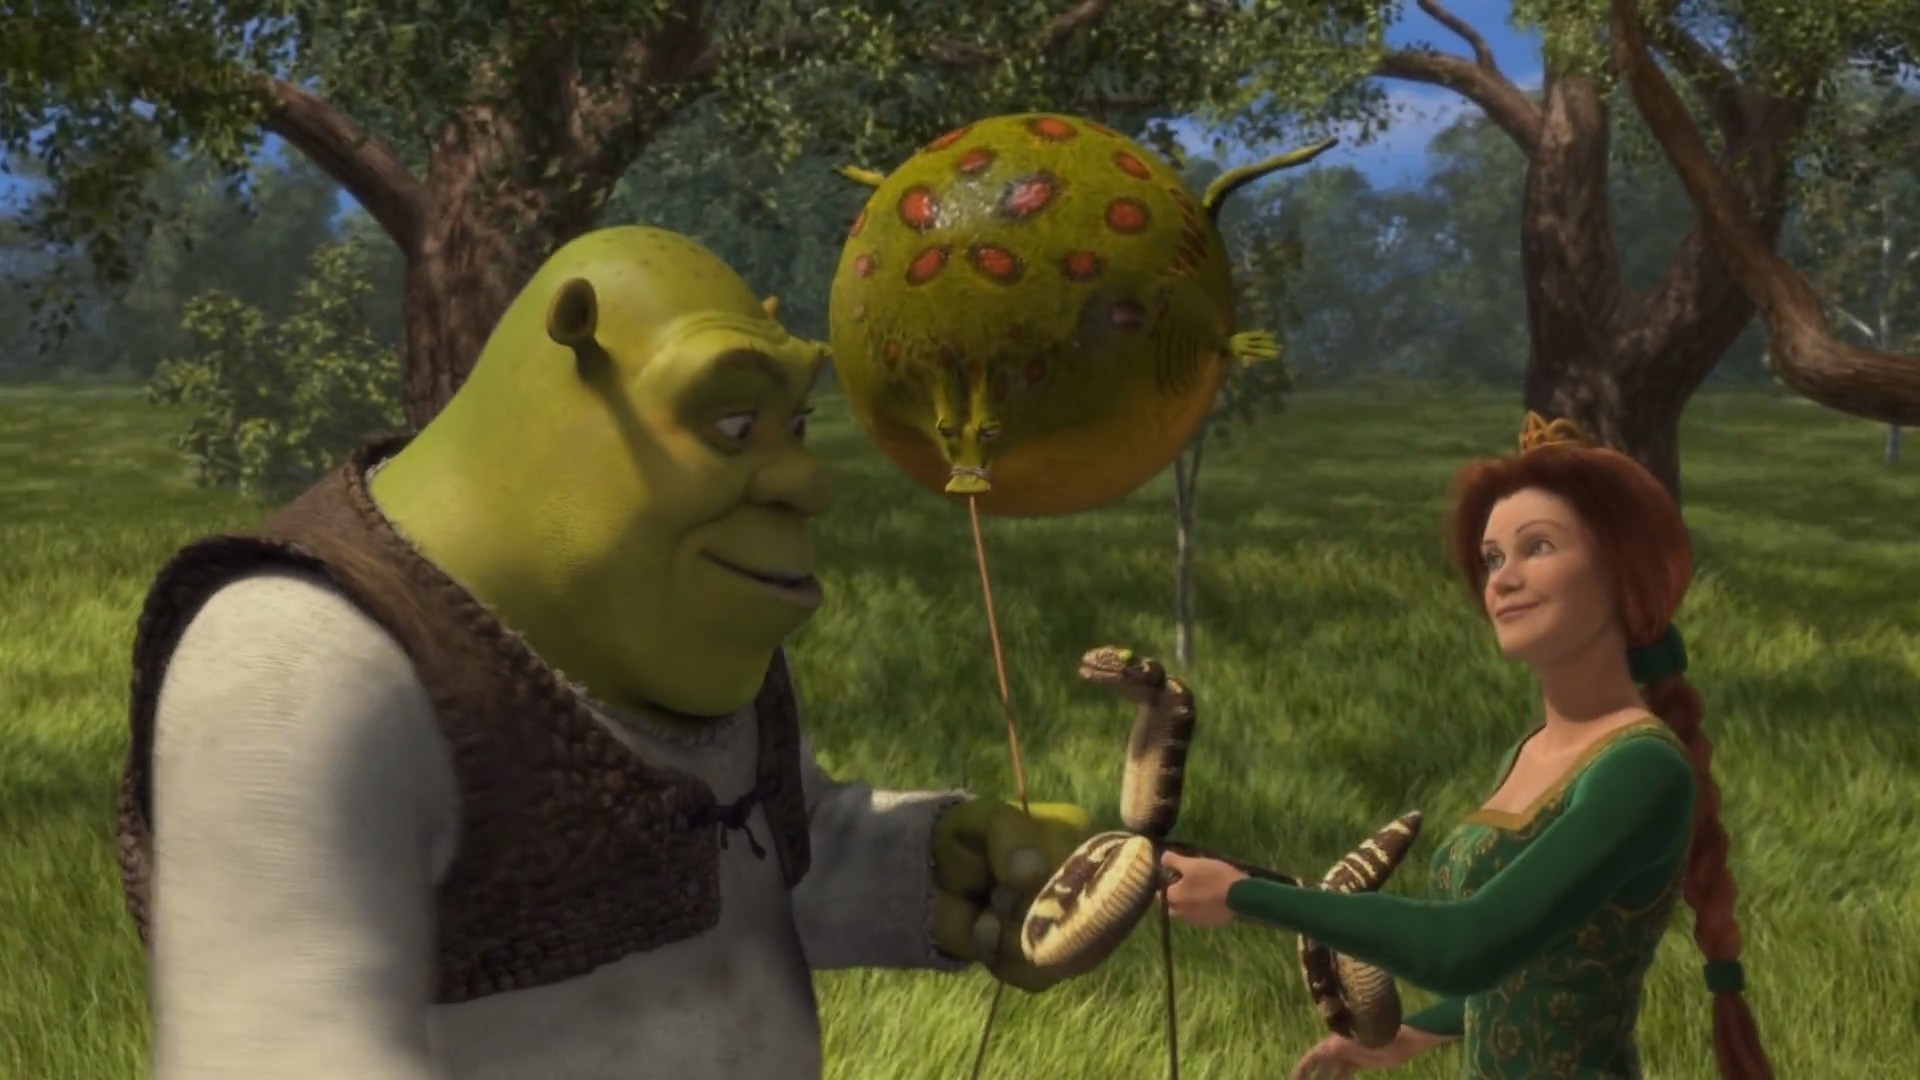 1920x1080 15 Things You May Not Know About 'Shrek'